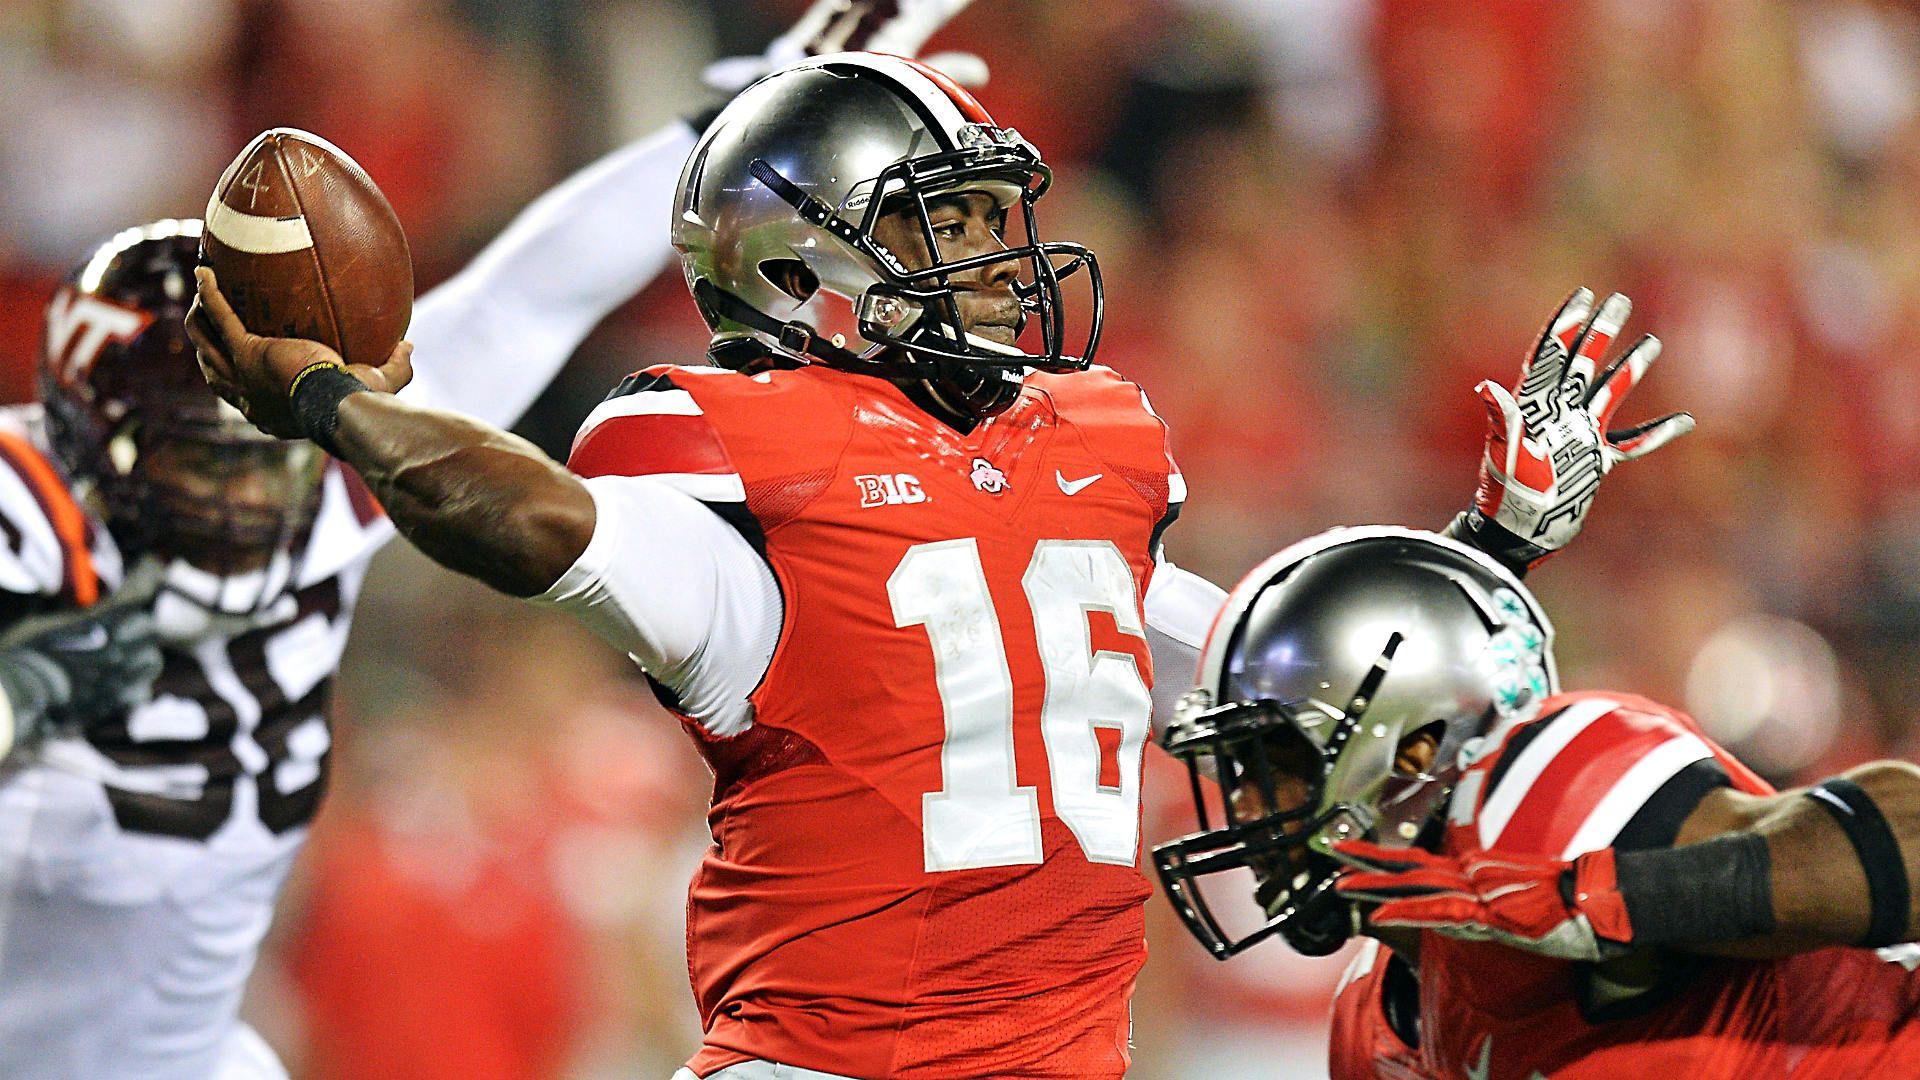 JT Barrett's struggles were going to surface sooner or later. NCAA